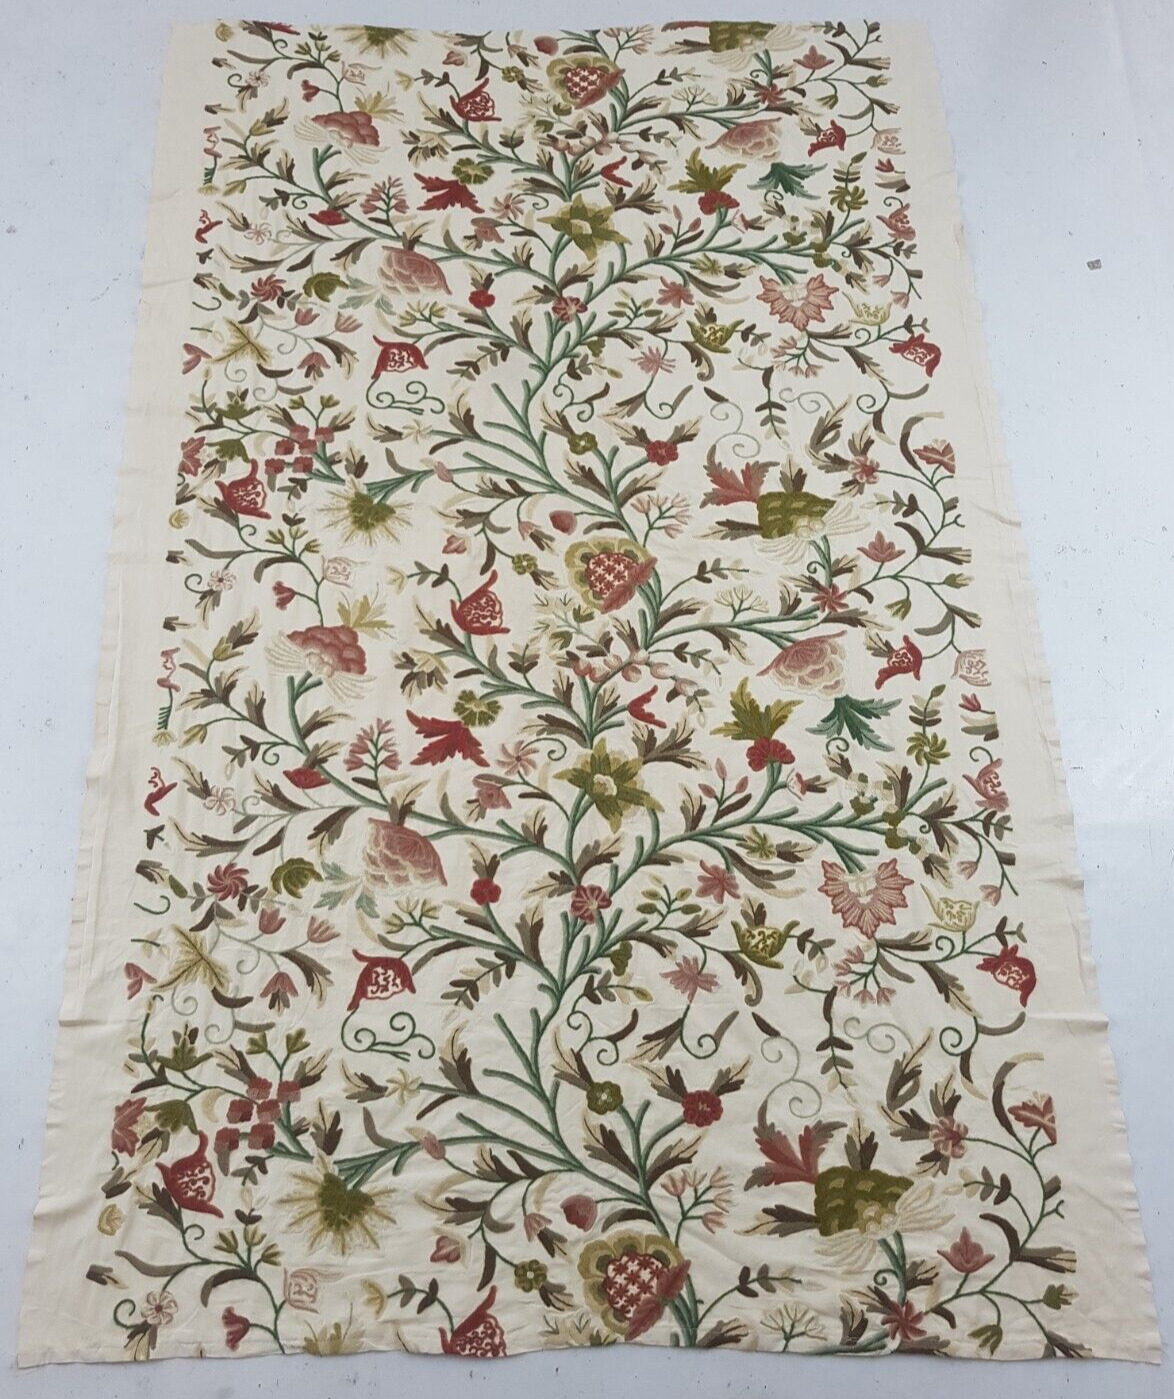 Antique Crewel Work Hand Embroidered Floral Wall Hanging Curtain Panel 228x149cm